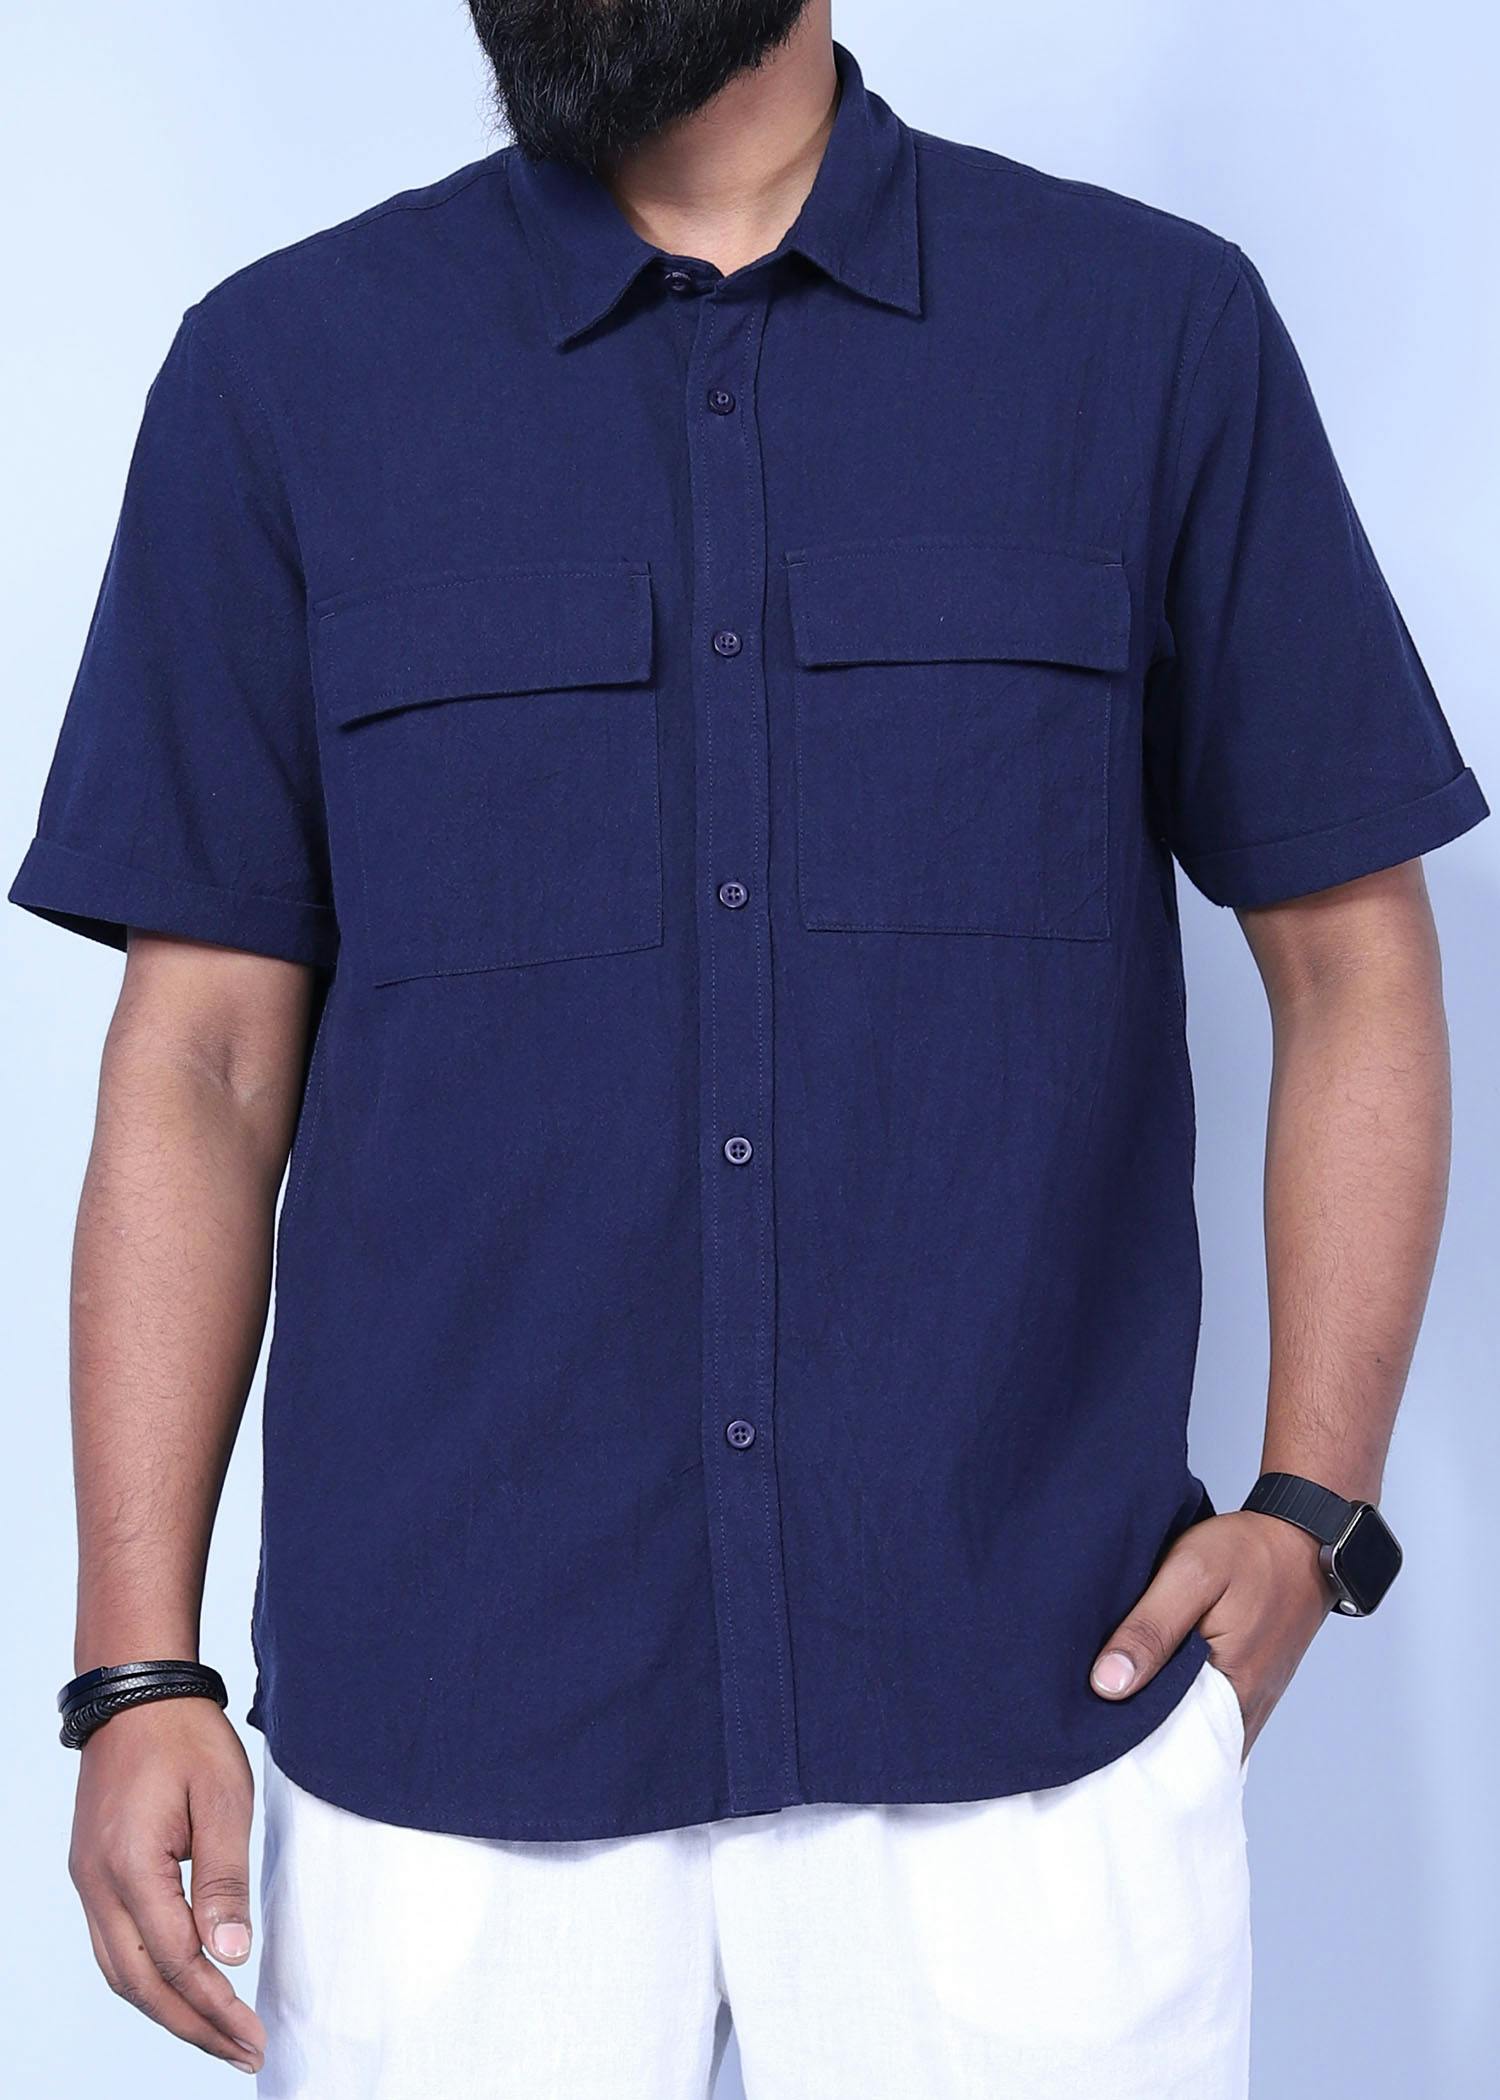 istanbul xxi hs shirt navy color facecropped